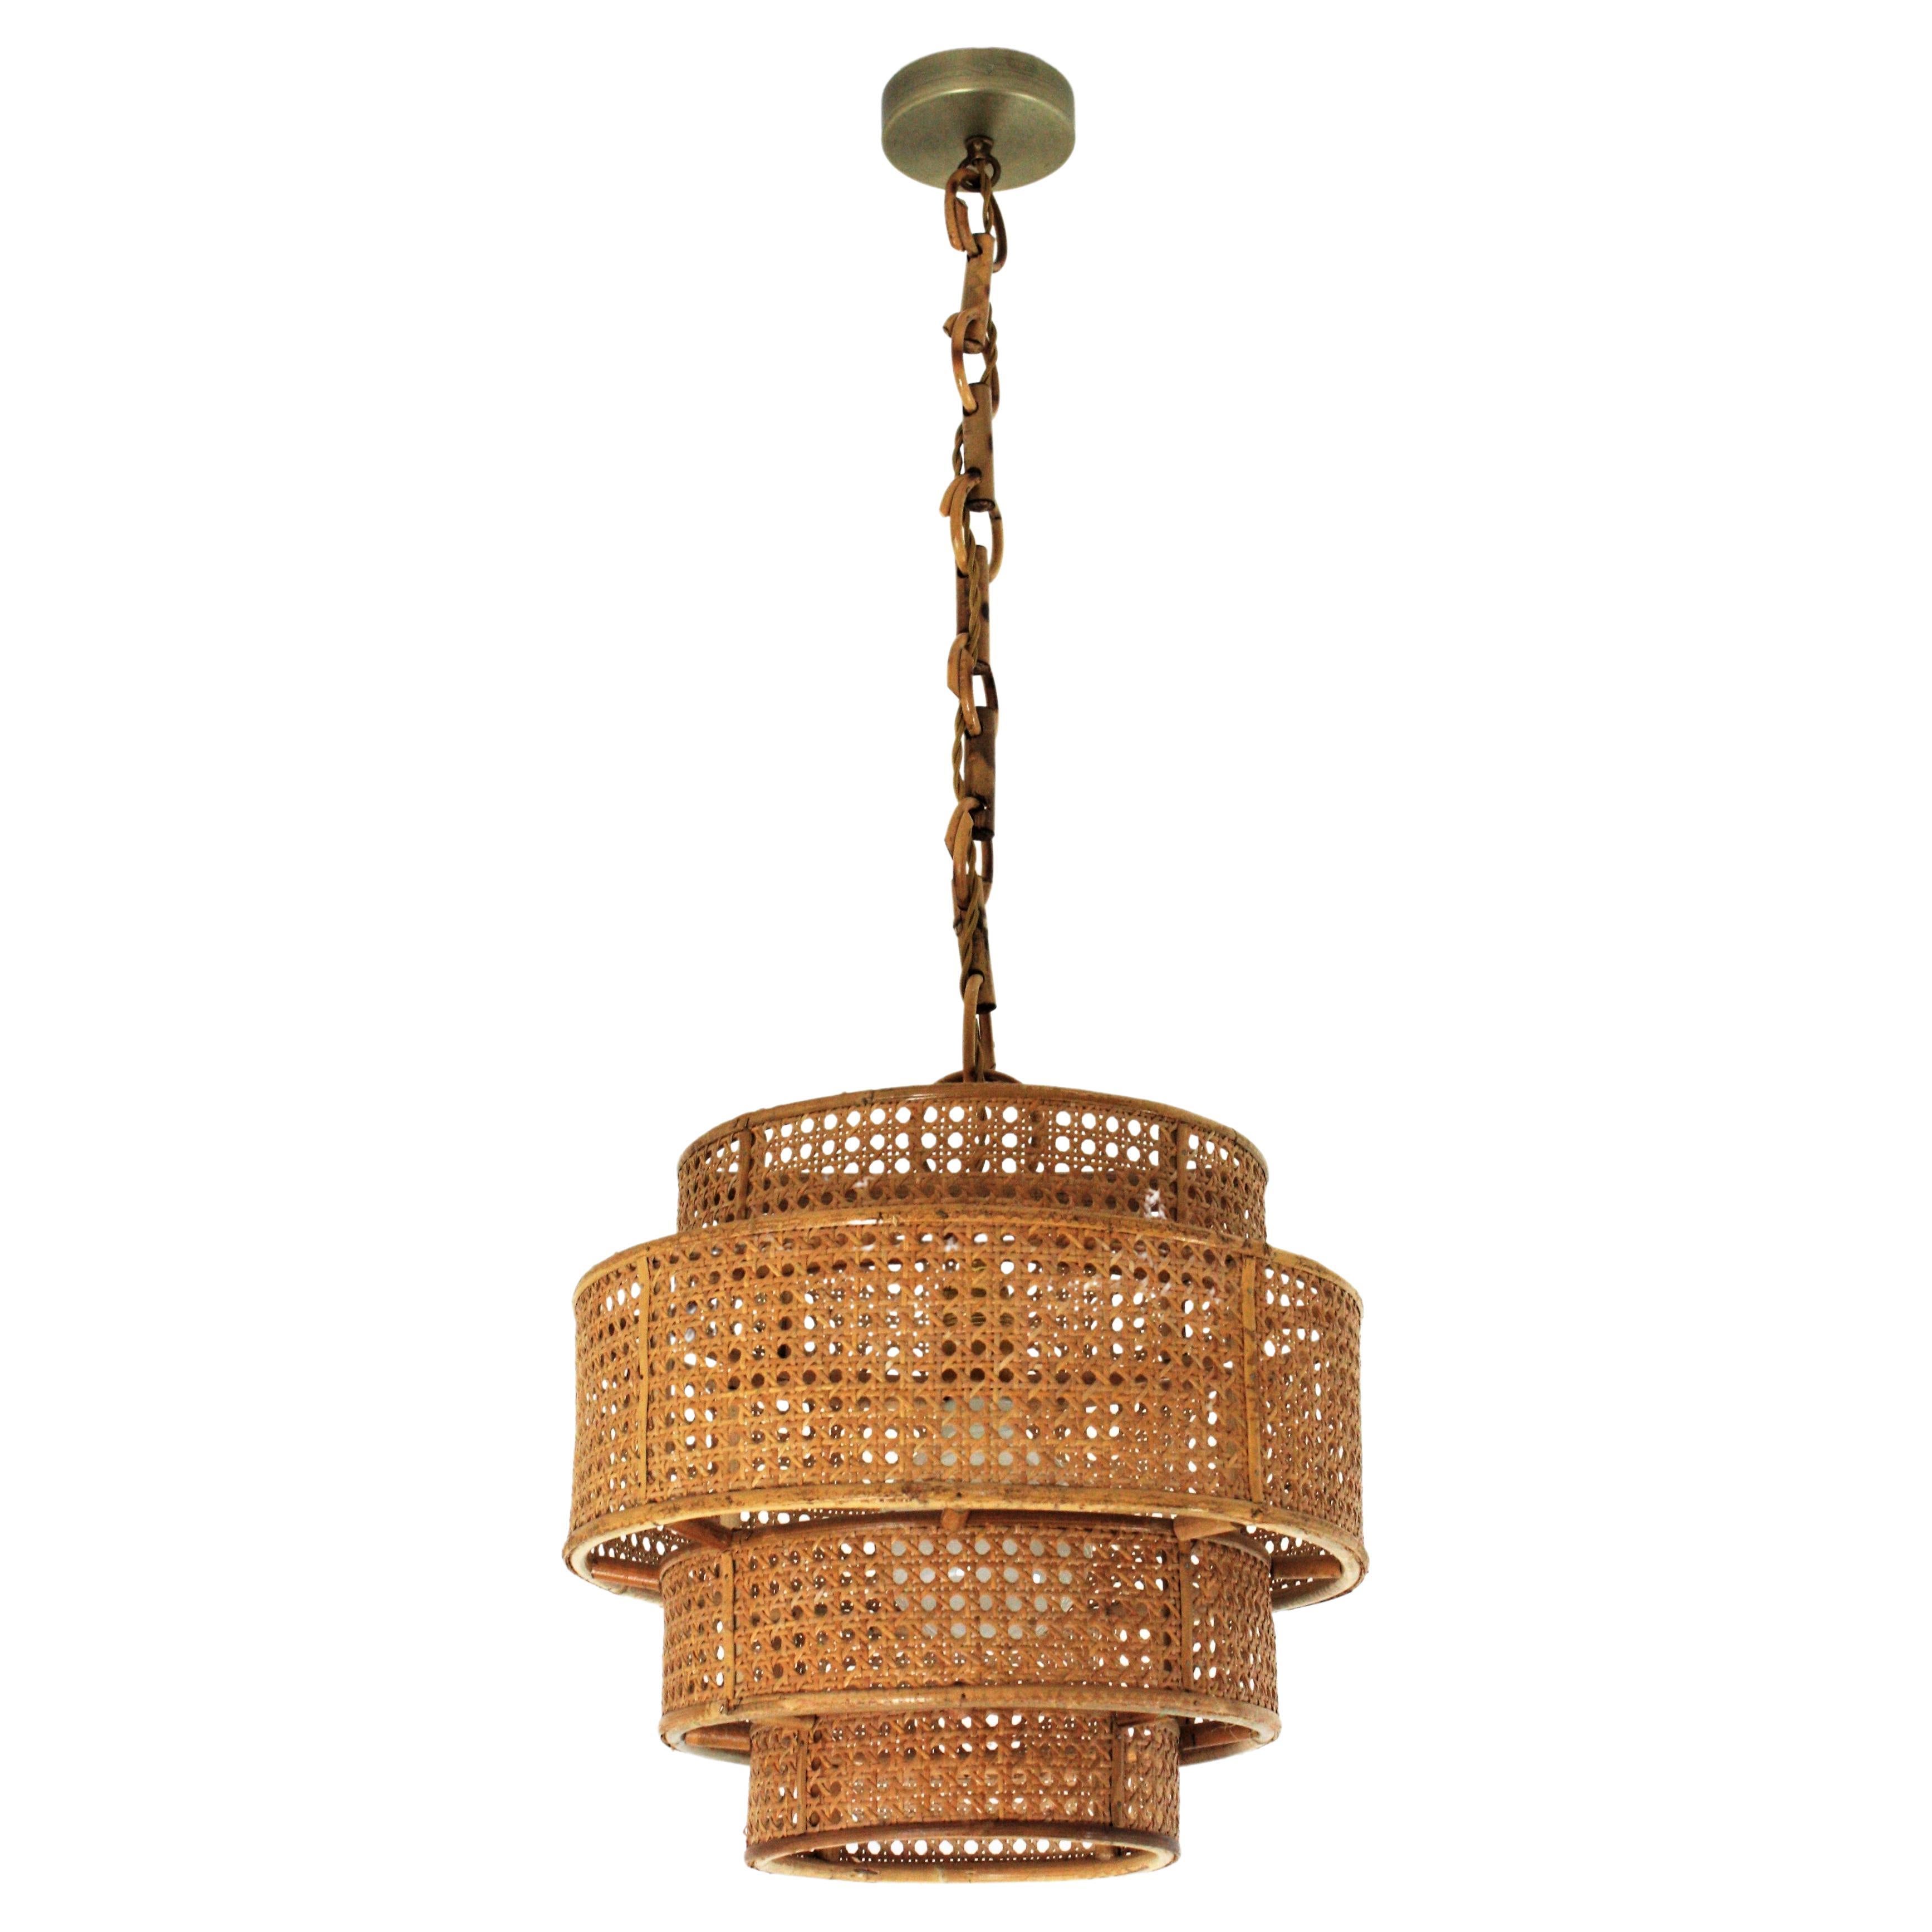  Rattan Wicker Weave Concentric Cylinder Pendant Hanging Light, 1960s